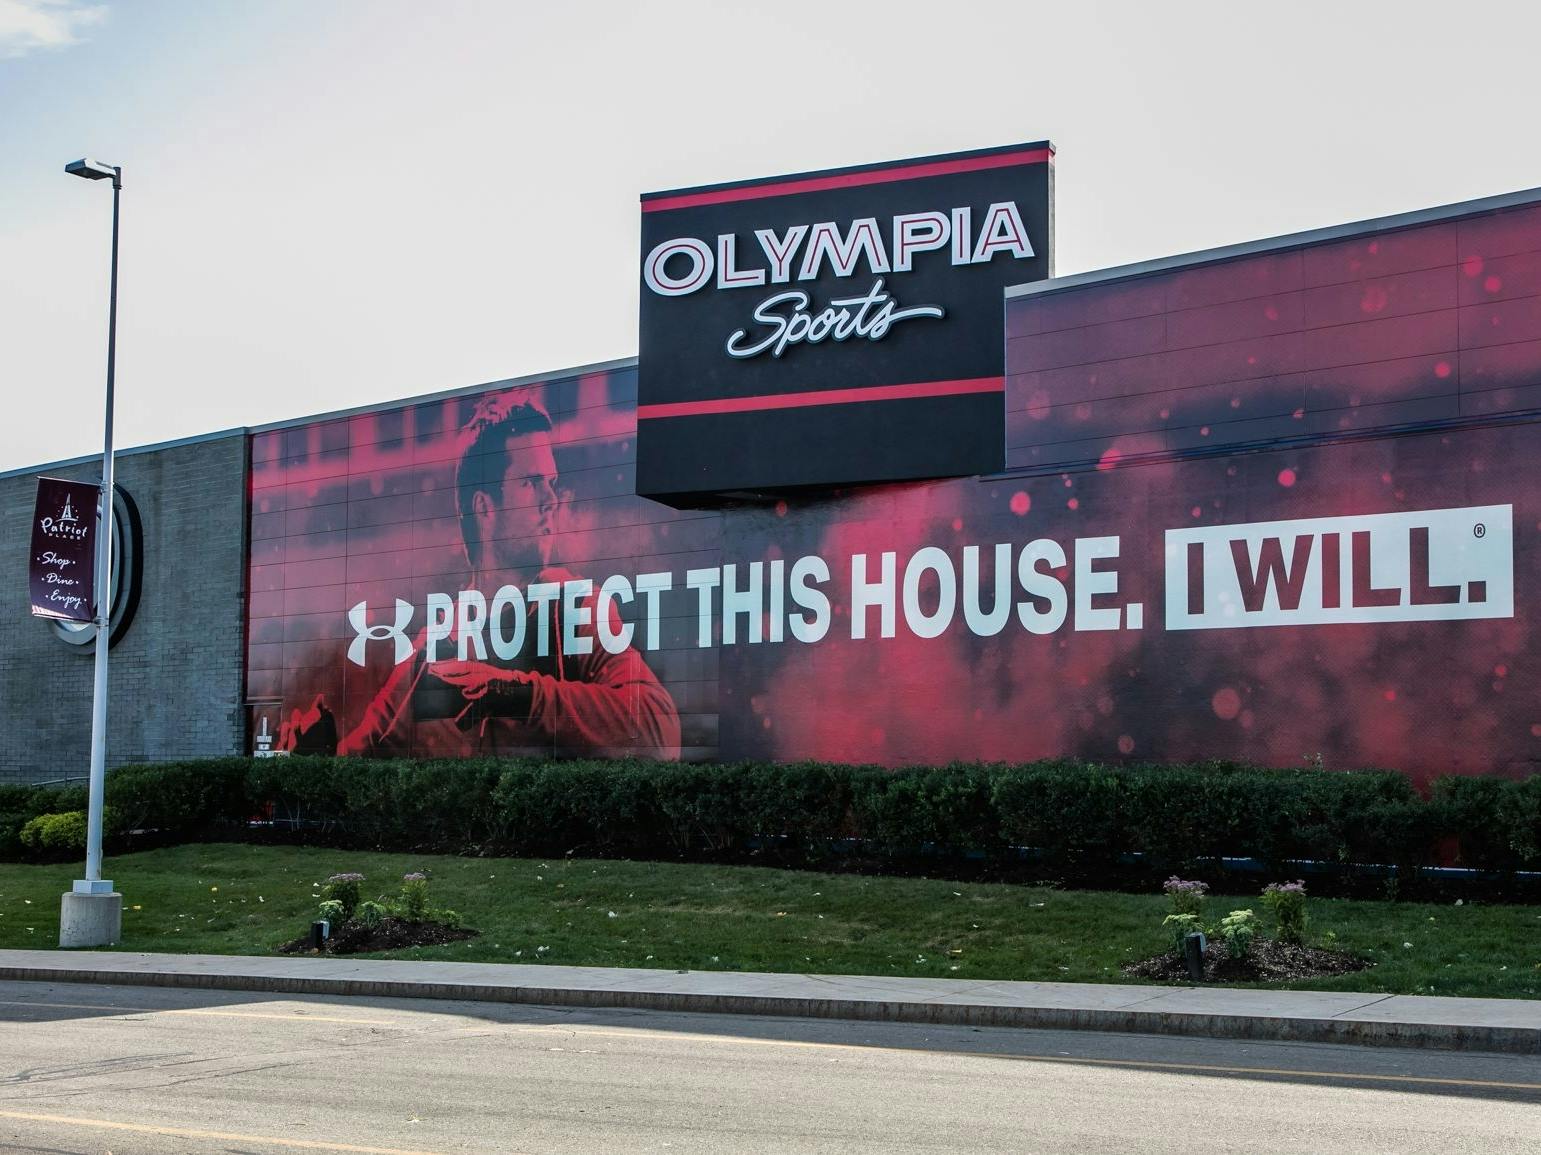 Olympia Sports store with an under armour slogan displayed on the side of the building. "Protect this house. I will.